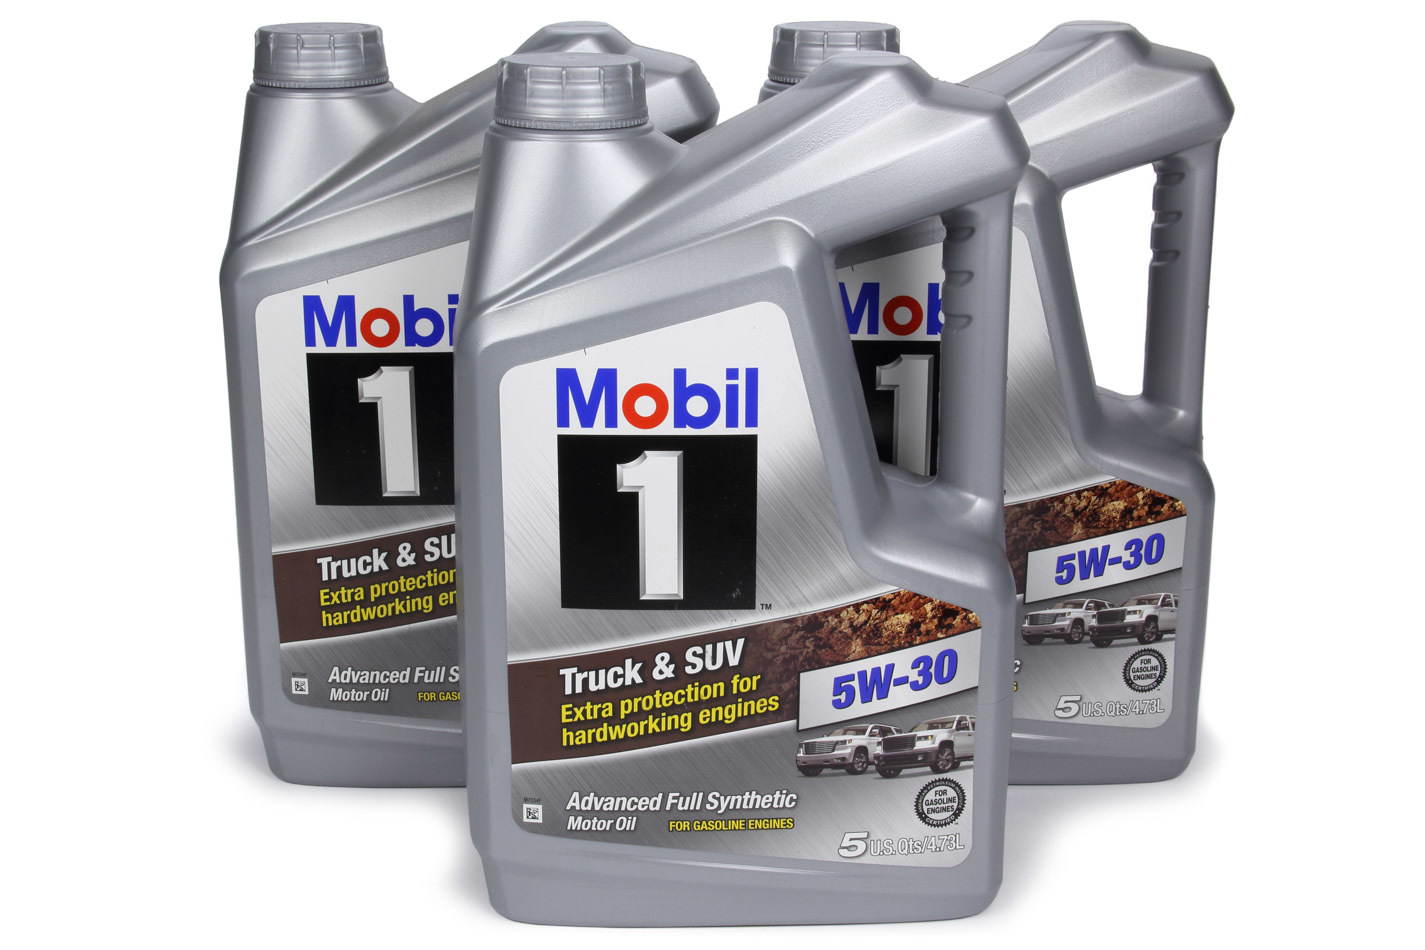 MOBIL 1 Motor Oil Truck and SUV 5W30 Synthetic 5 qt Jug Set of 3